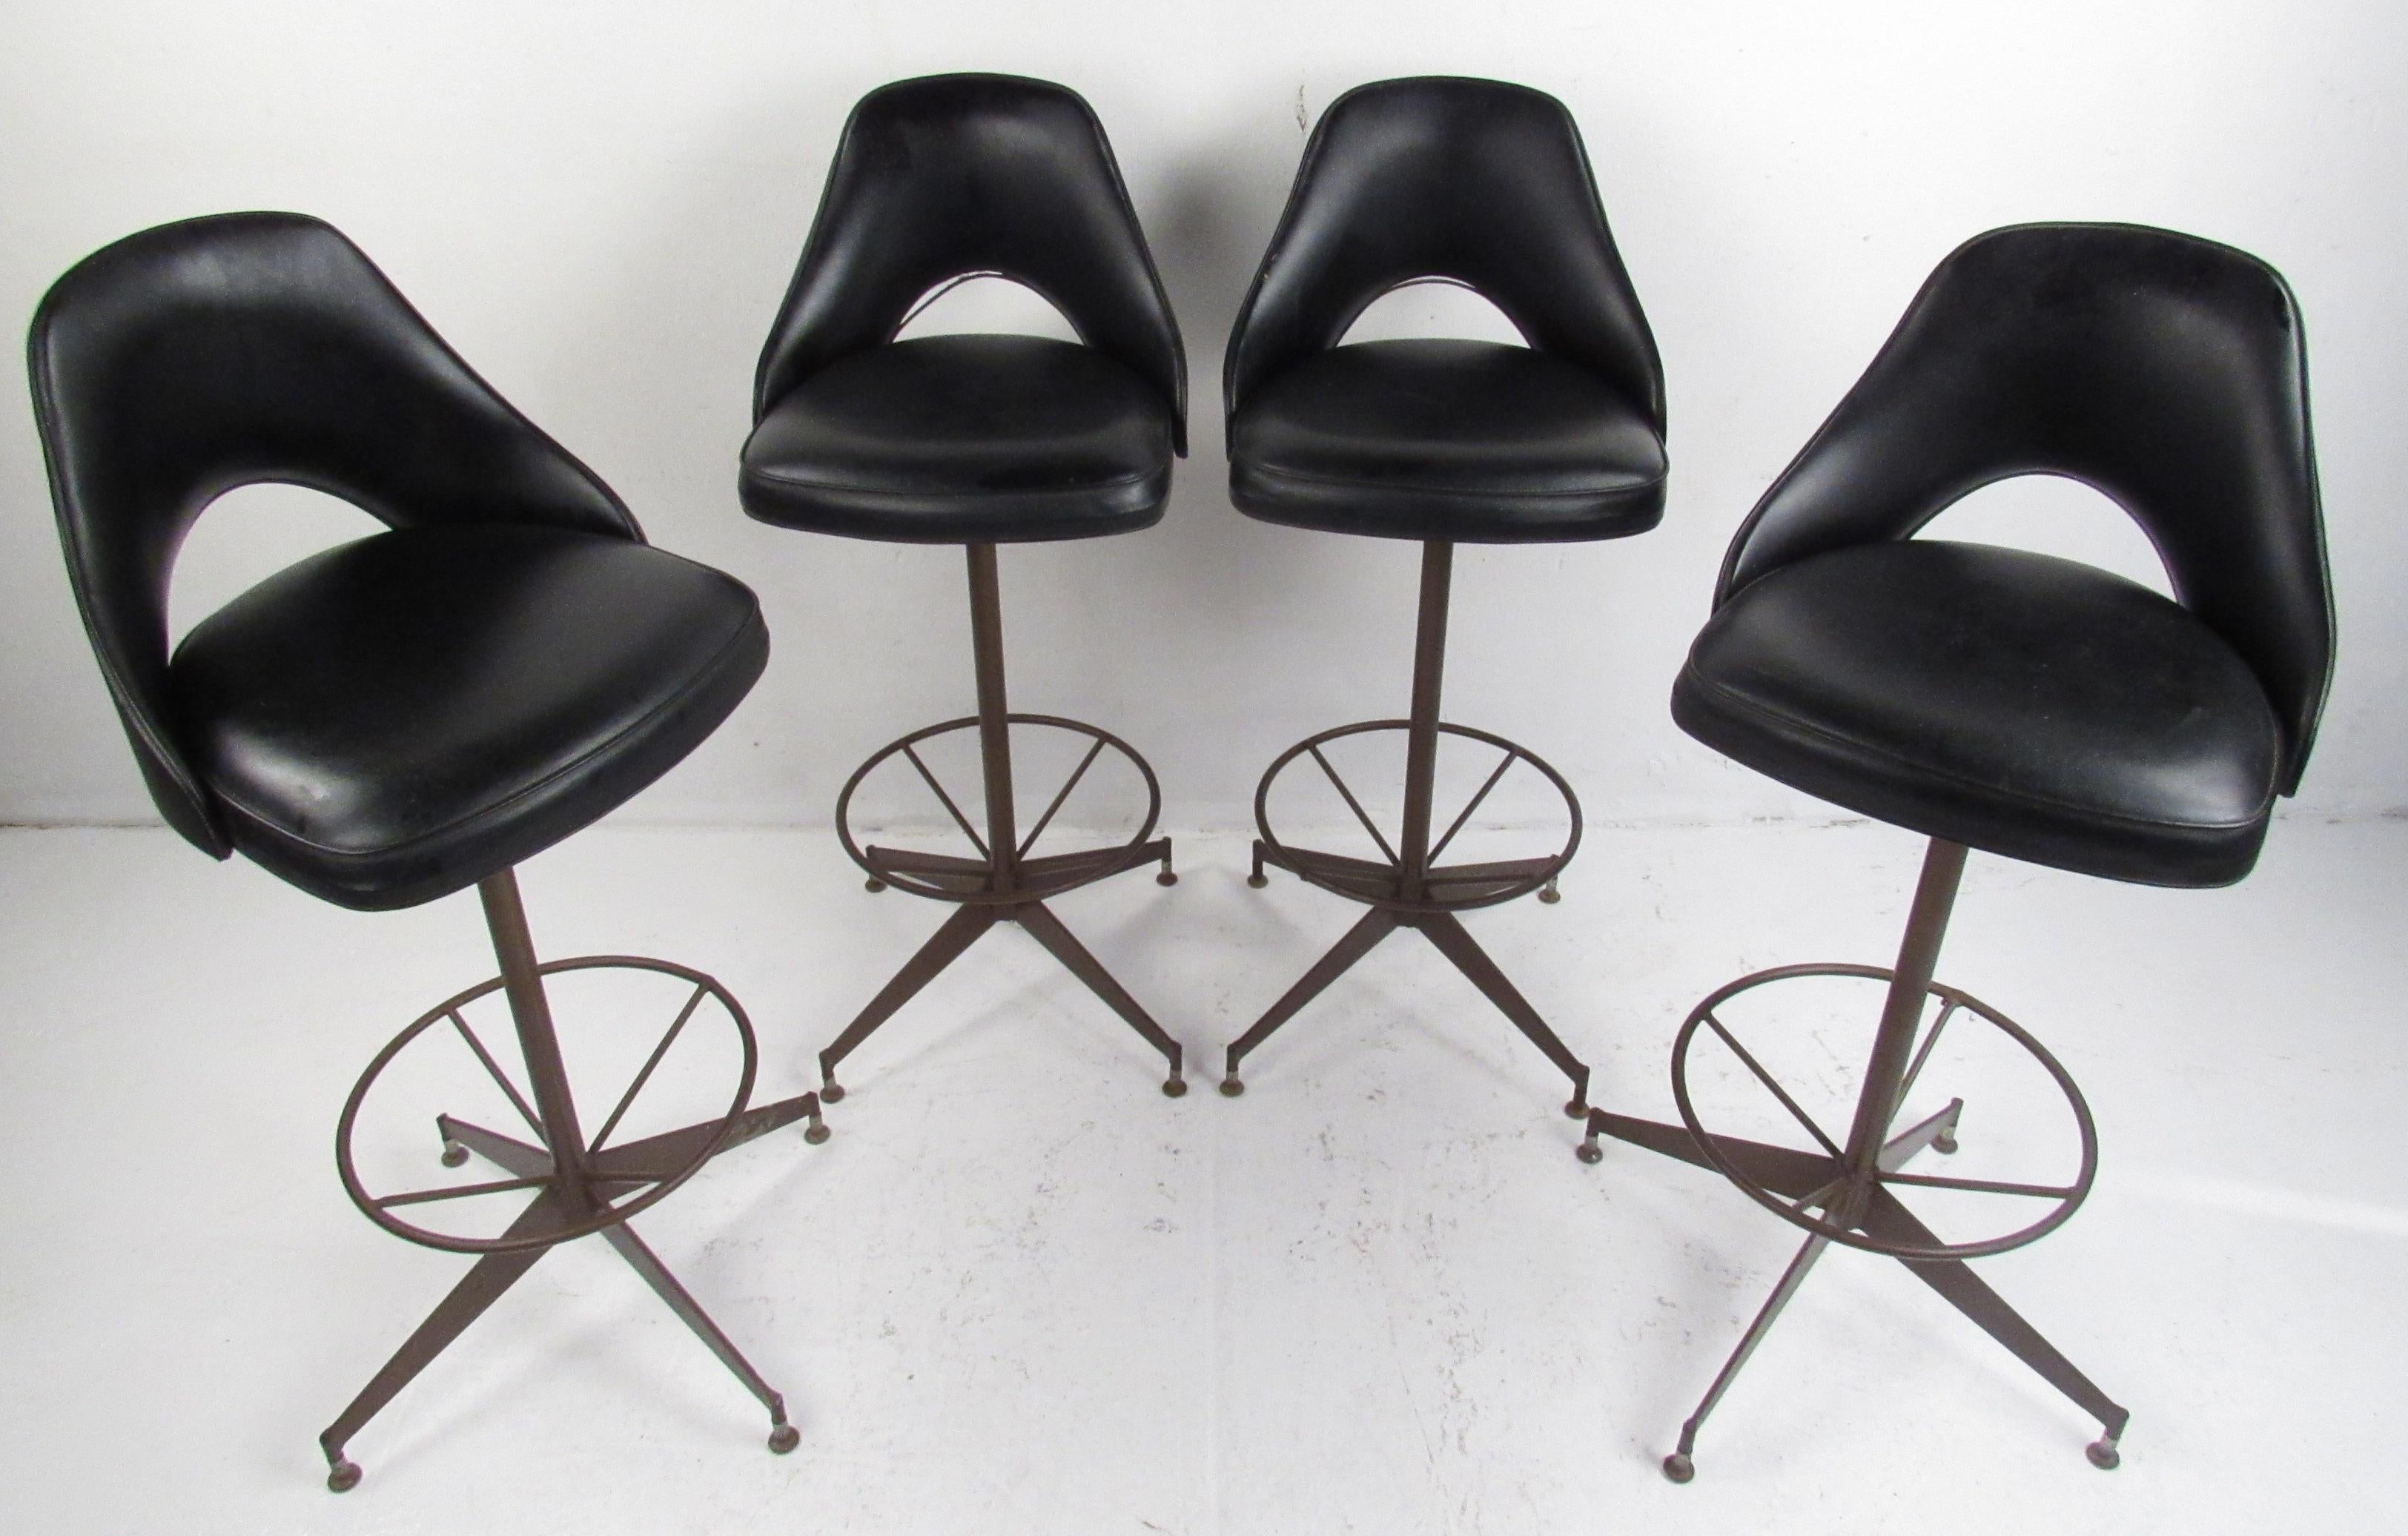 Great set of vintage stools by Antarenni Wrought Iron of Brooklyn, N.Y. These swivel stools have original vinyl seats/backs with a large circular foot rest above a four star base giving a very sculptural/industrial appearance. Please confirm item